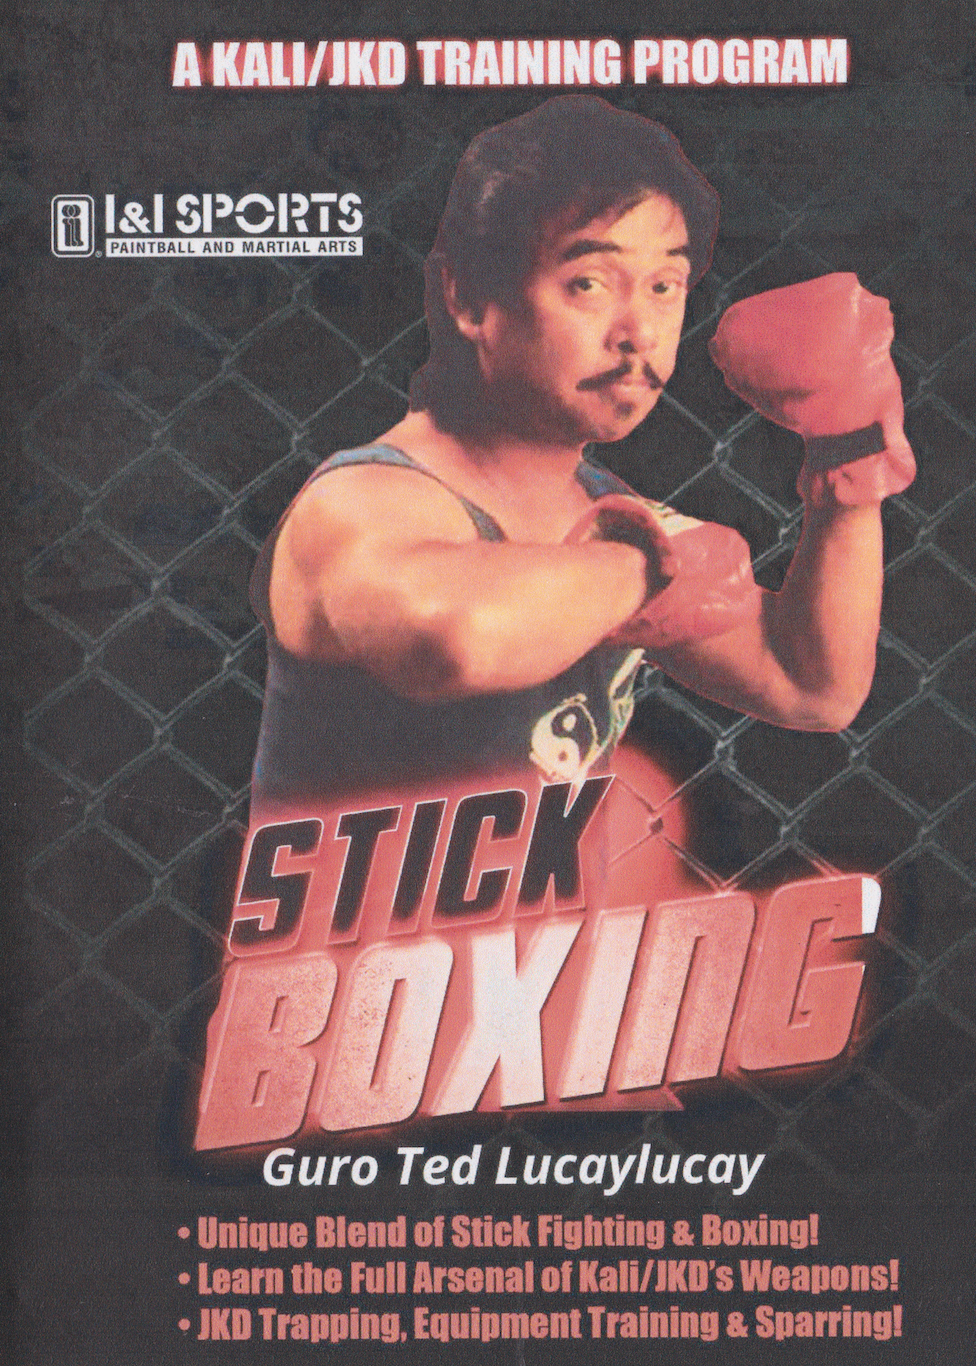 Stickboxing DVD with Ted Lucaylucay